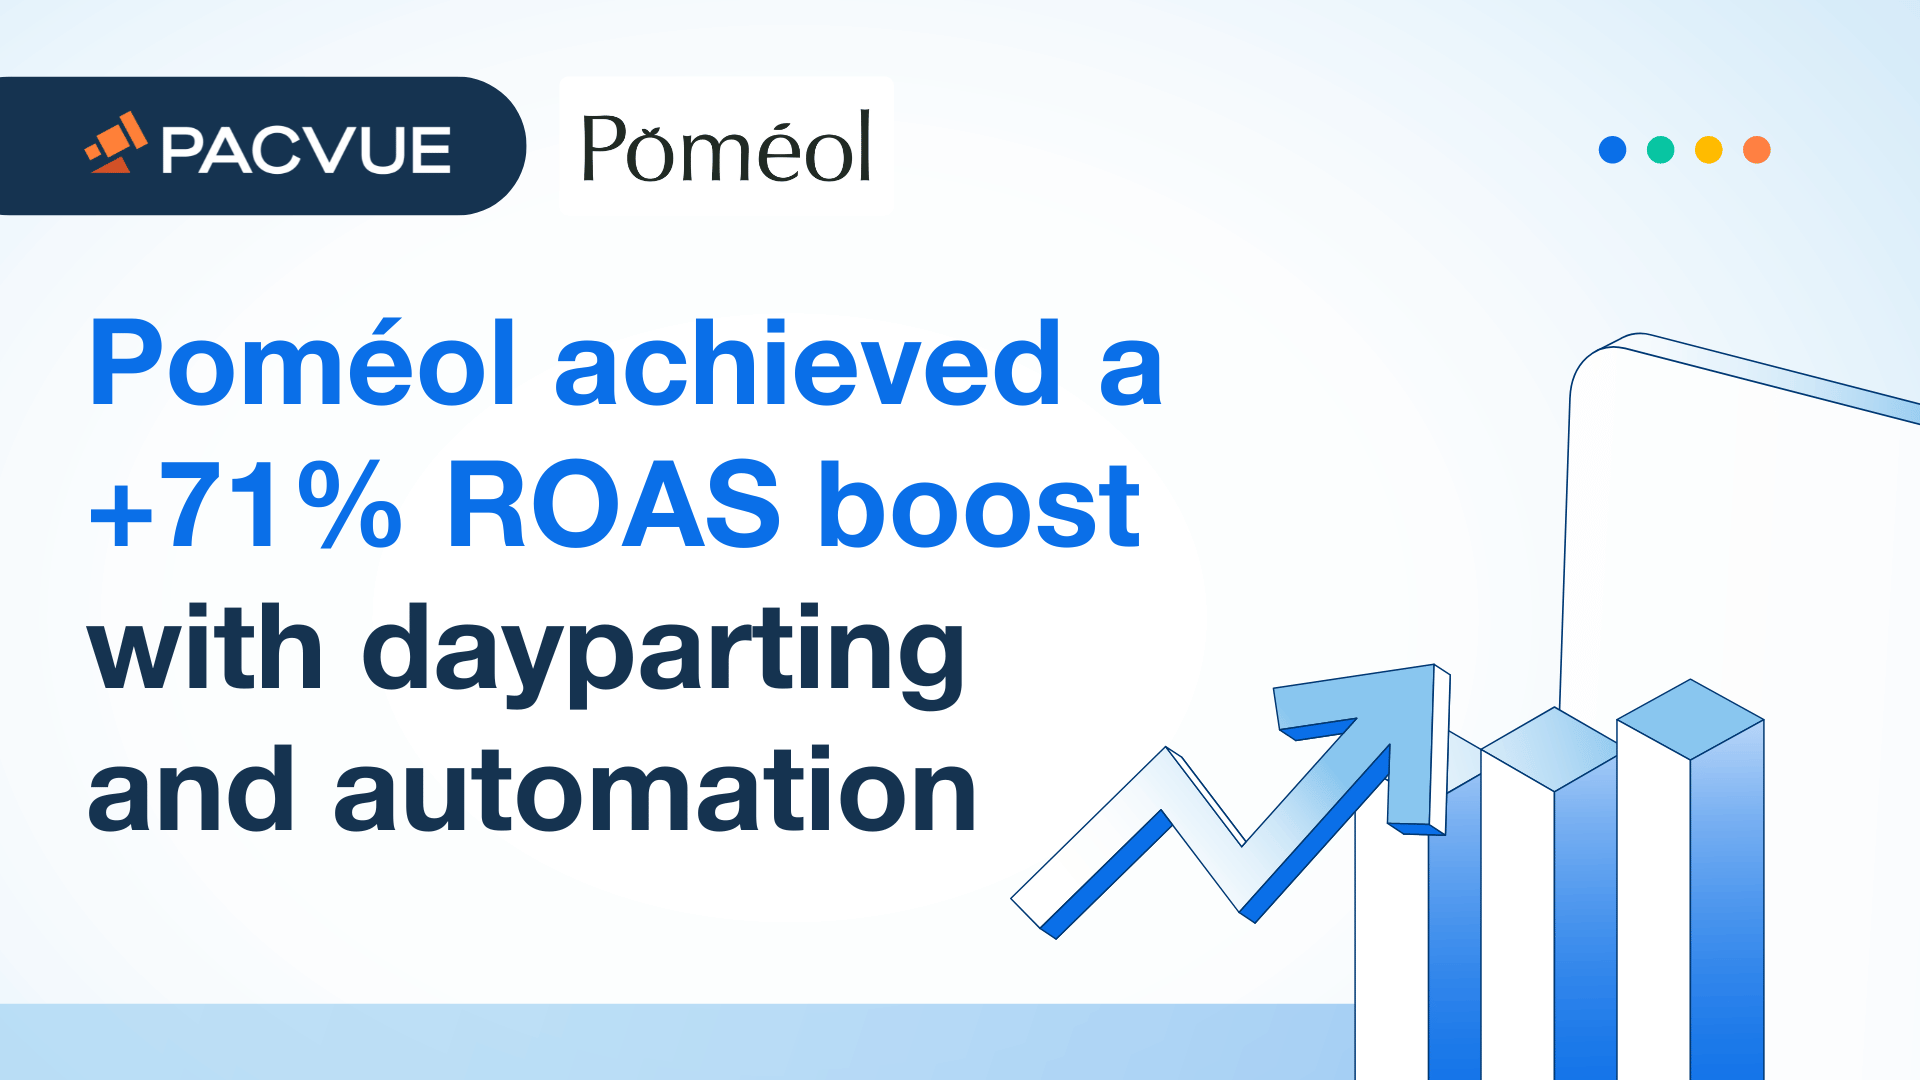 Poméol achieved a +71% ROAS boost with dayparting and automation